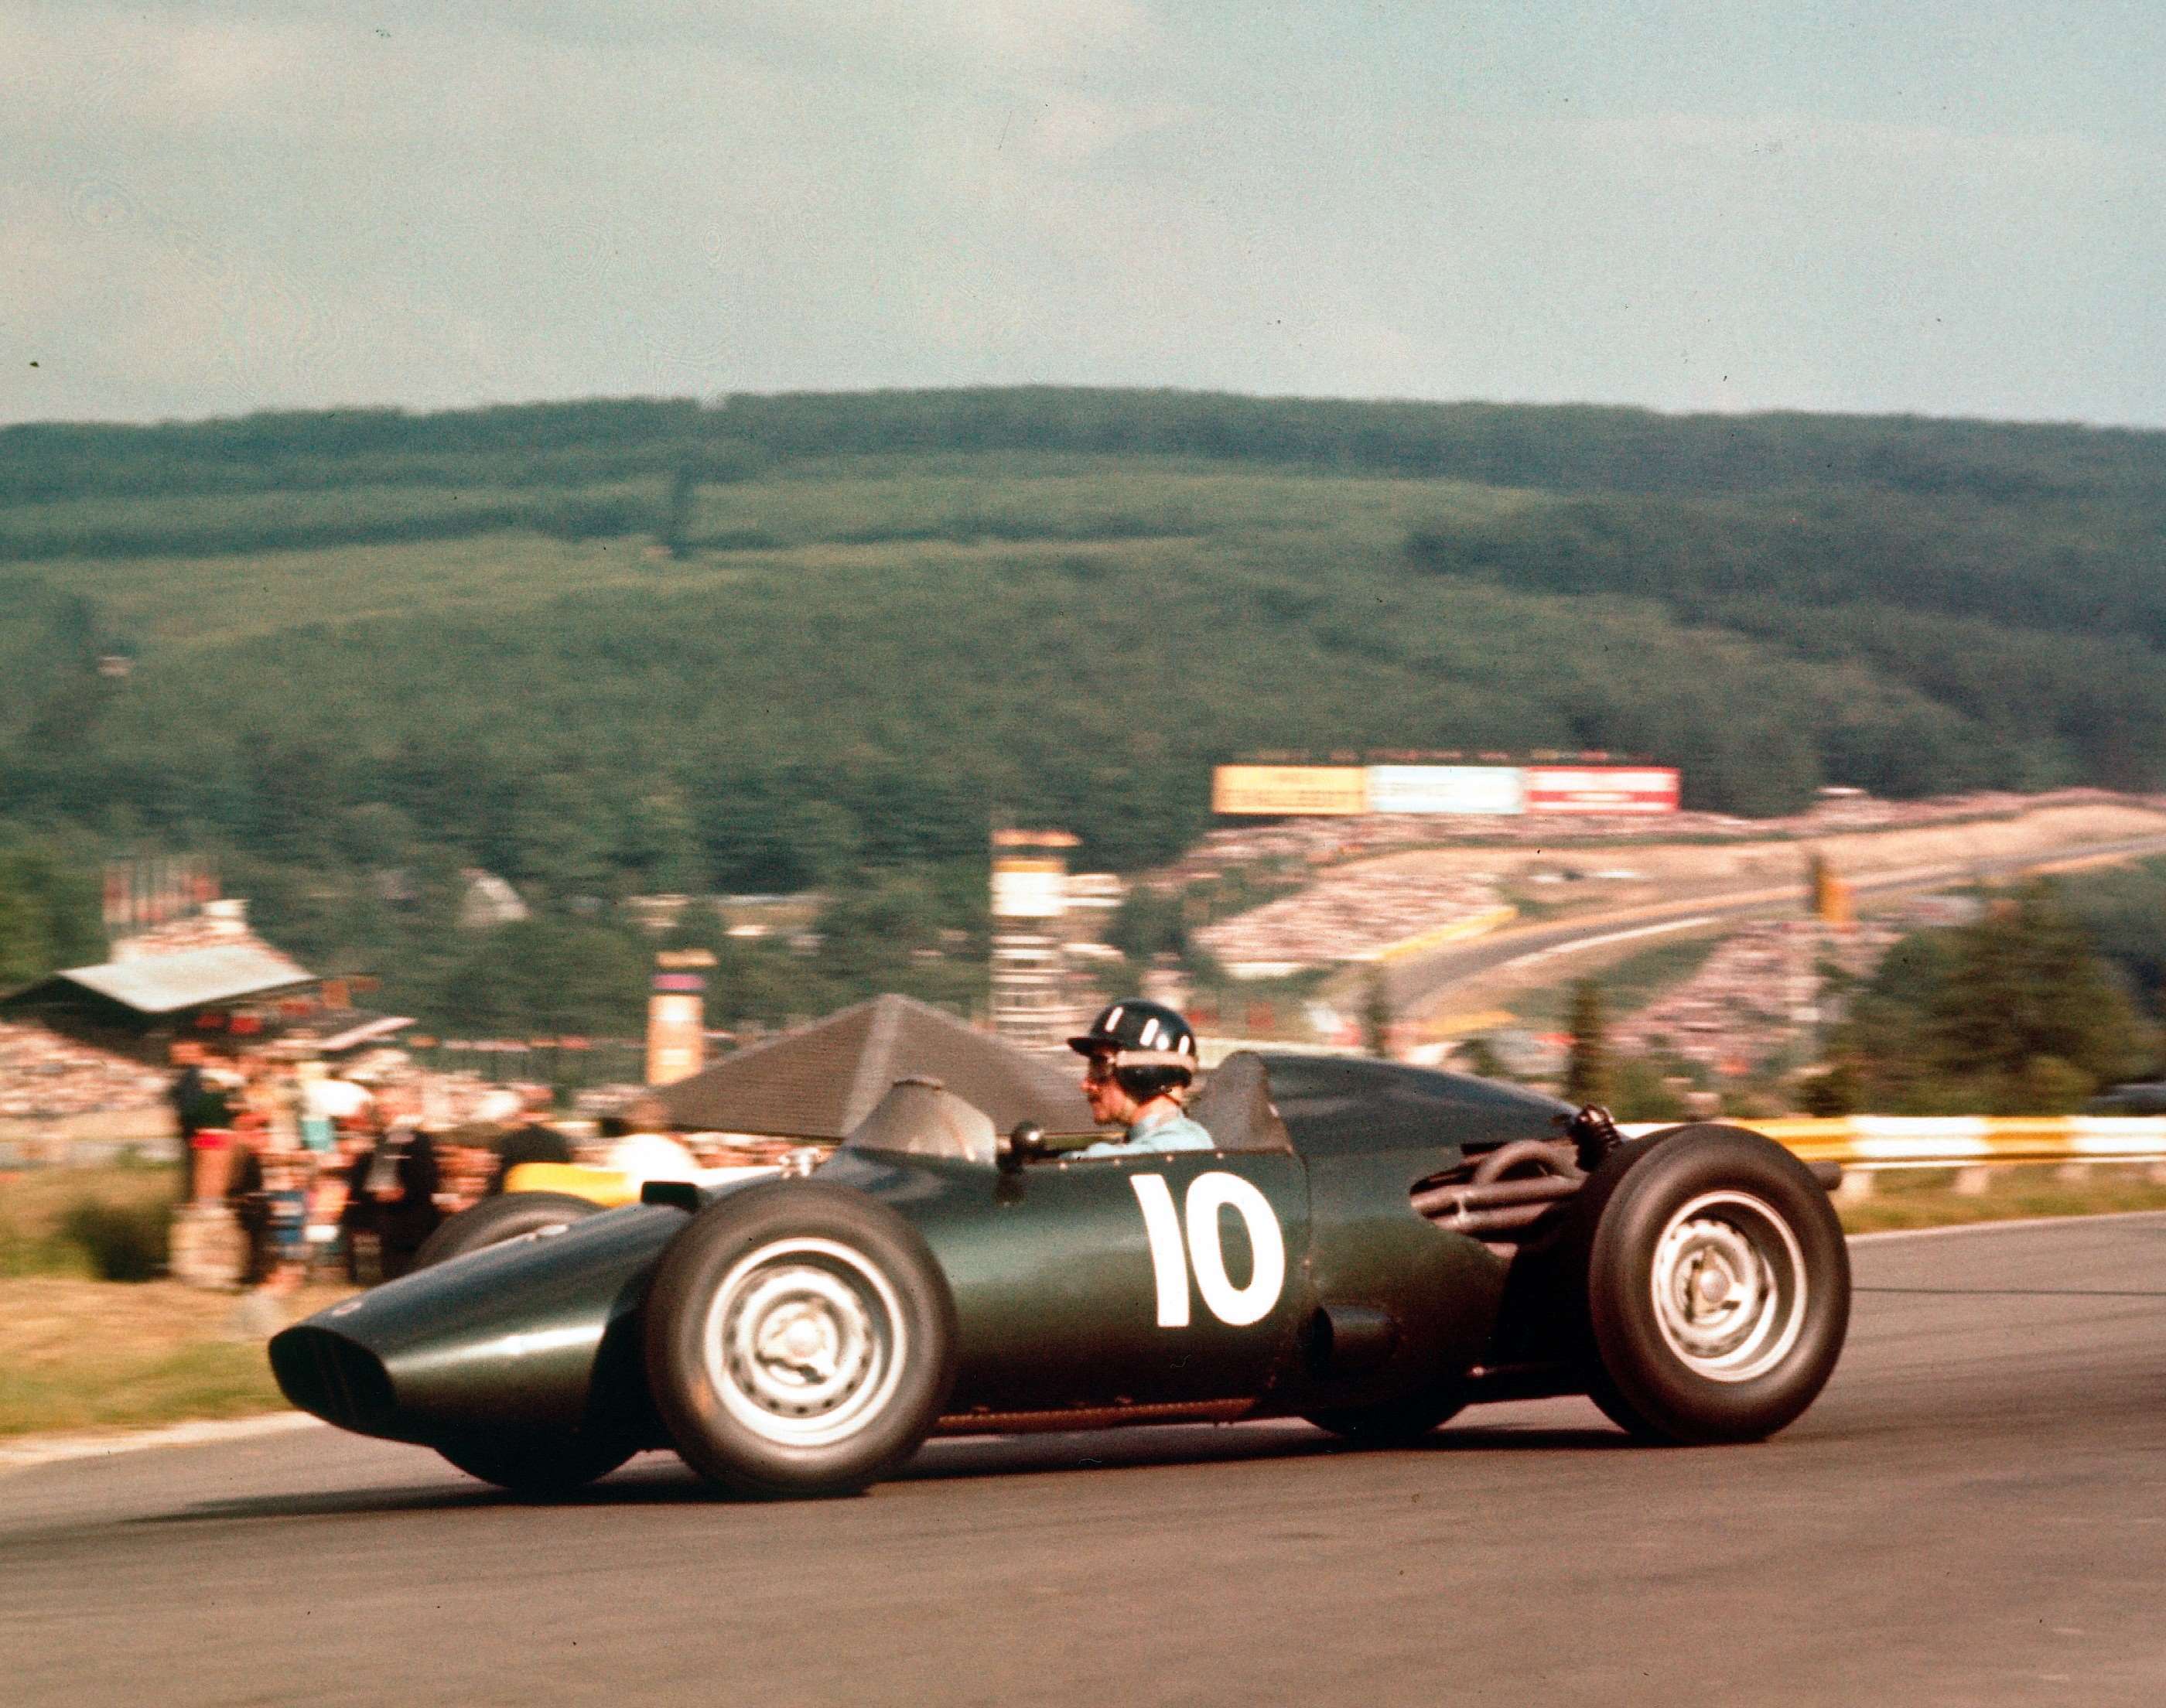 1960 BELGIAN GRAND PRIX - GRAHAM HILL IN THE DEVELOPING REAR-ENGINED BRM P48 AT LA SOURCE HAIRPIN